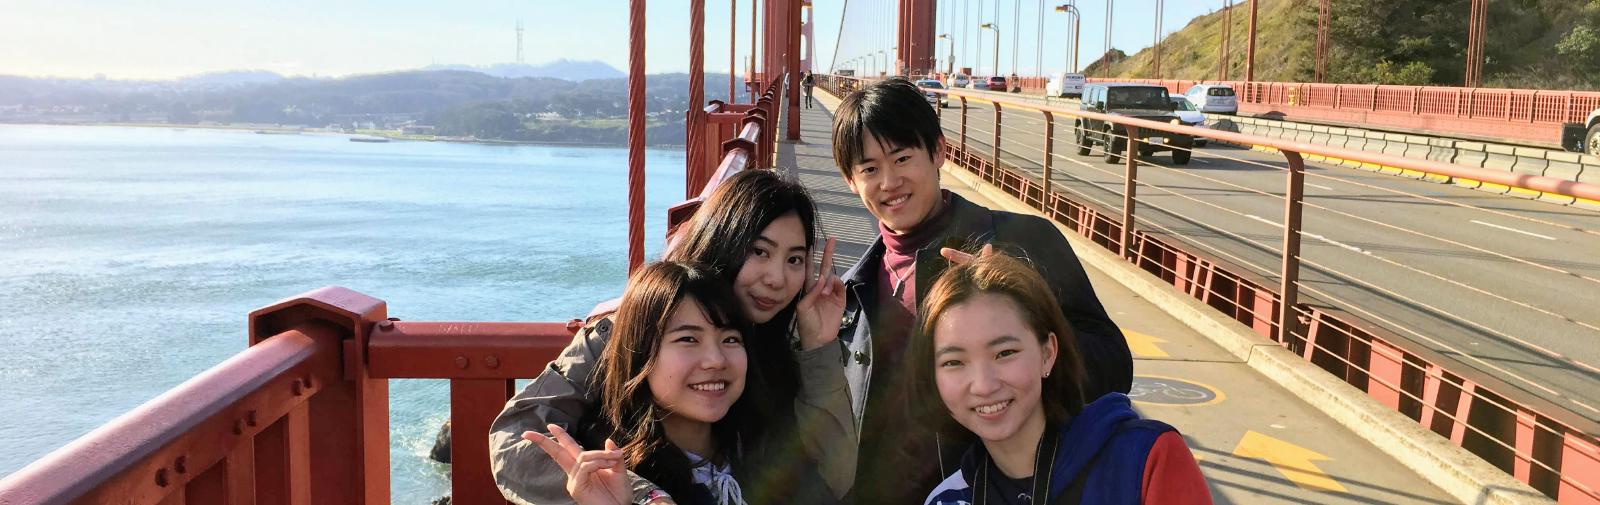 A group of people touring the Golden Gate Bridge.